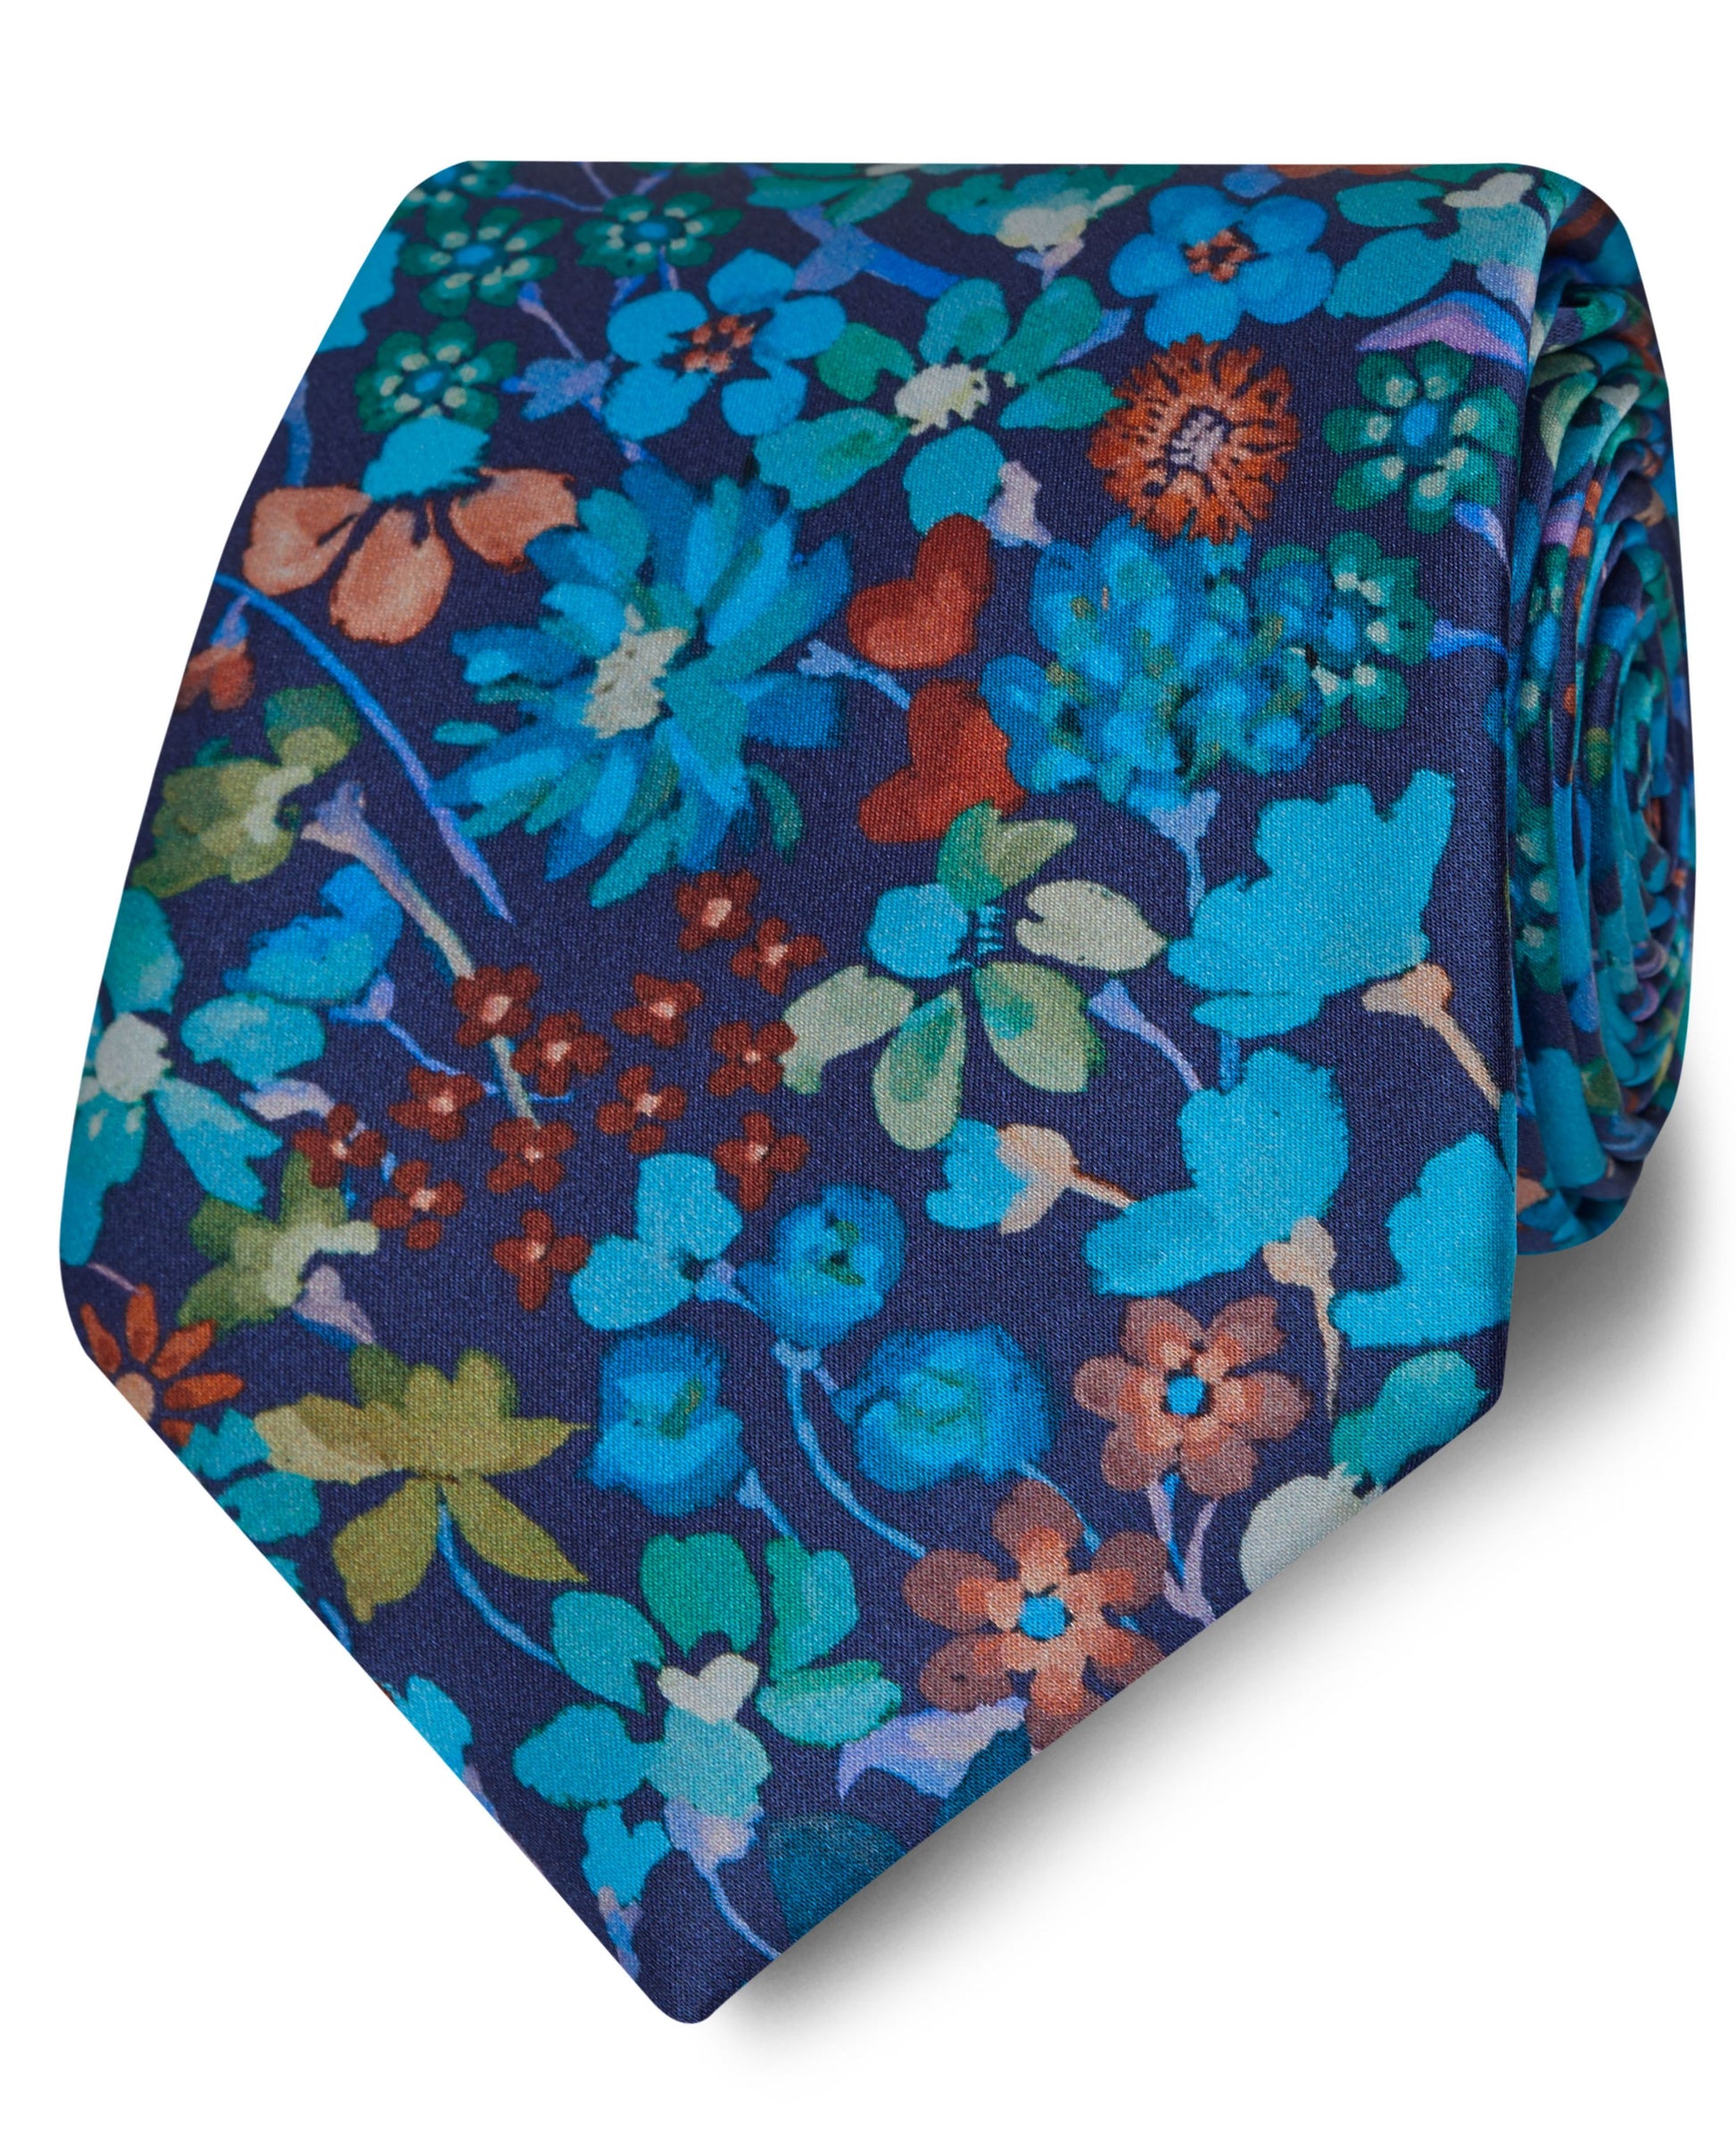 Image 1 of Made with Liberty Fabric Wide Blue Dreams of Belgravia Print Silk Tie